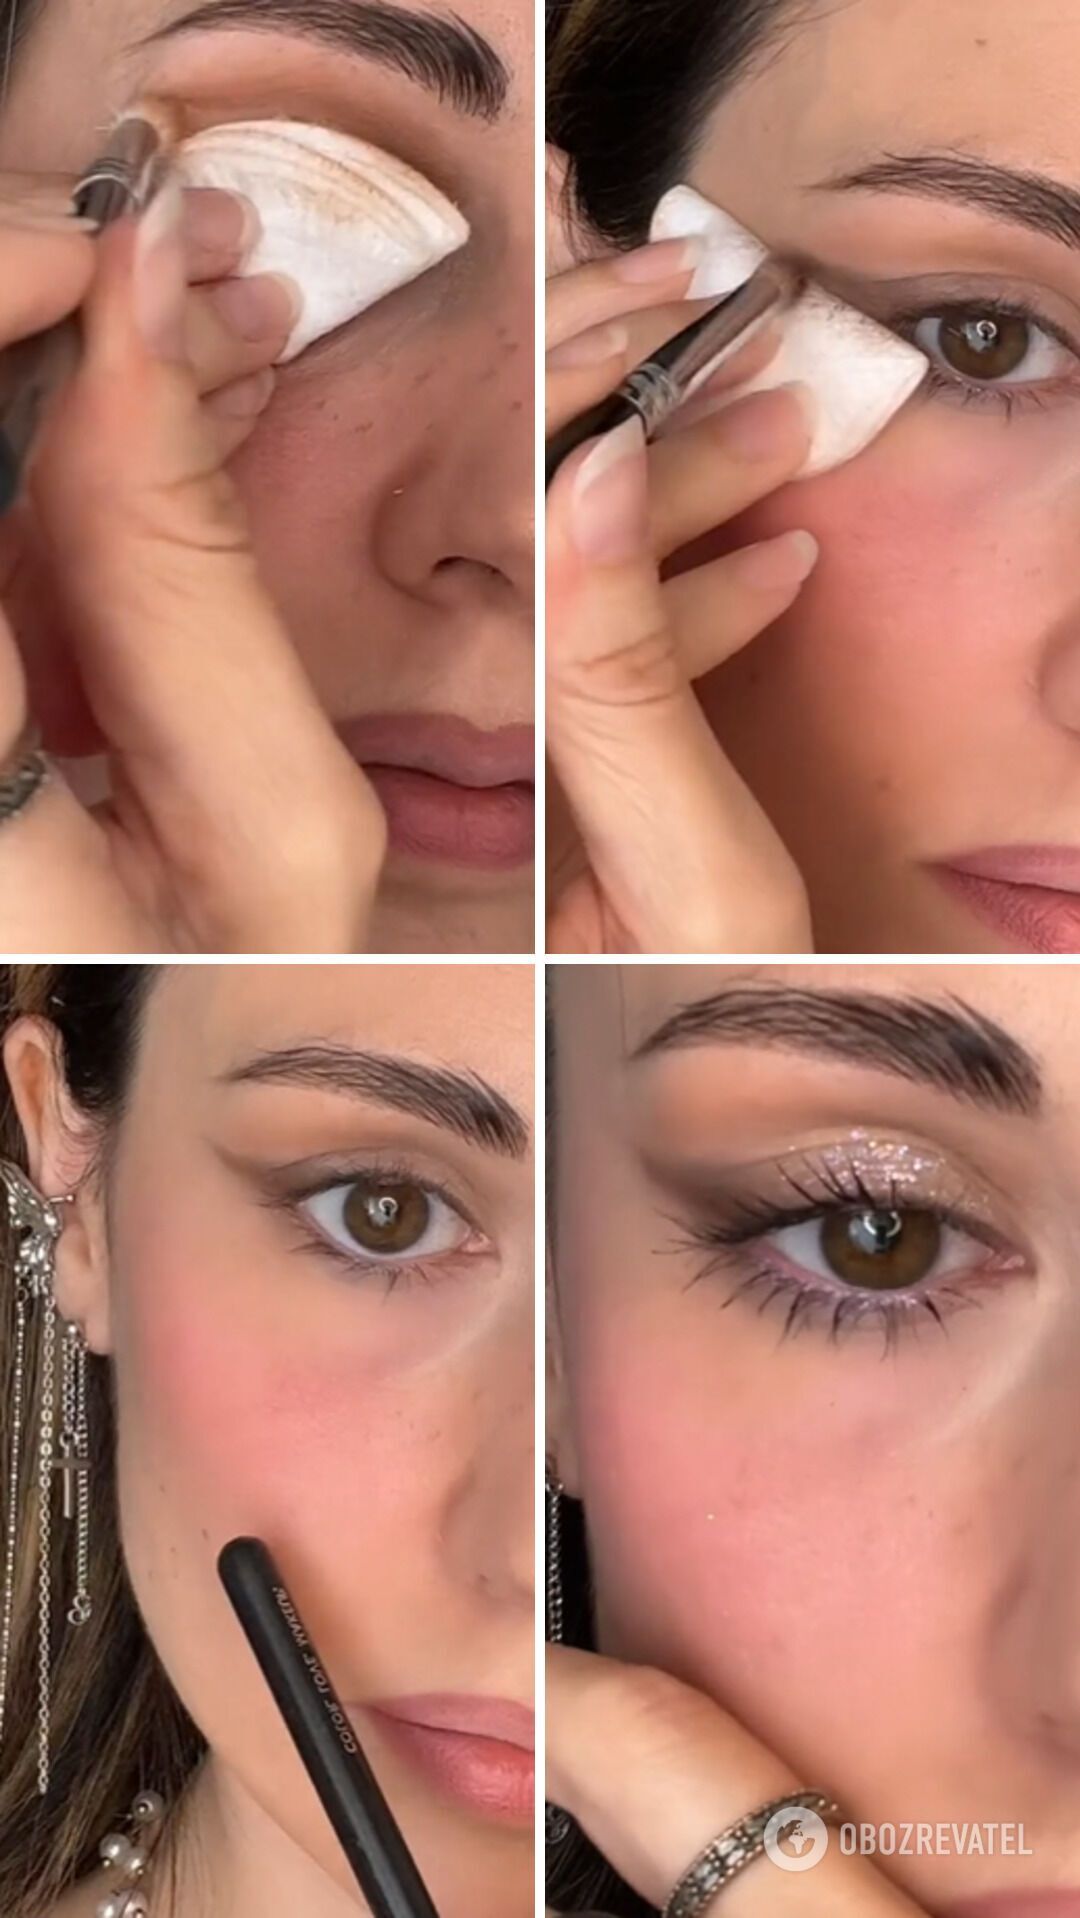 How to make perfectly clean makeup: a cotton ball will help